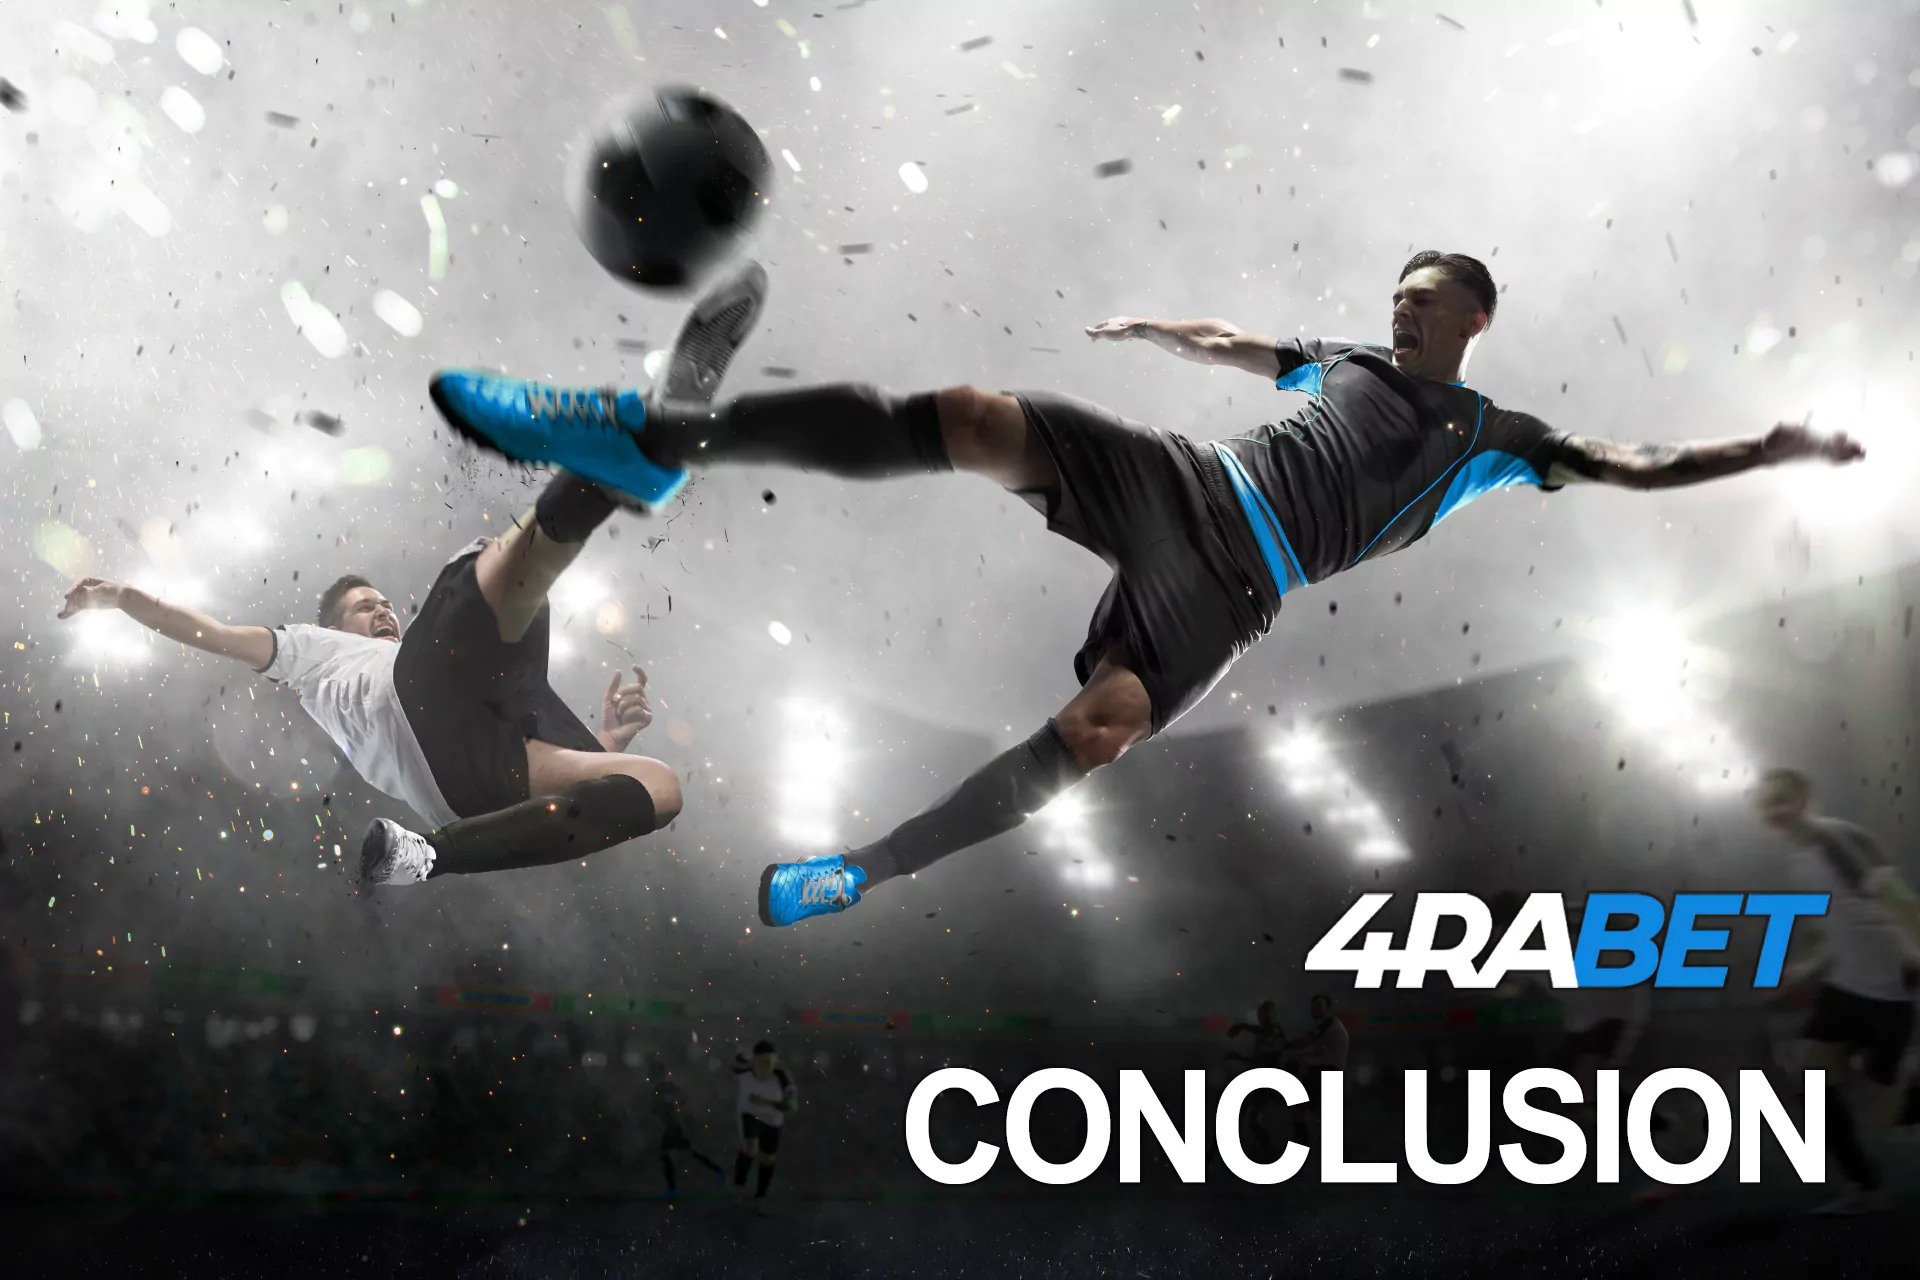 If you are a fan of football, 4rabet is the right choice for betting on matches.